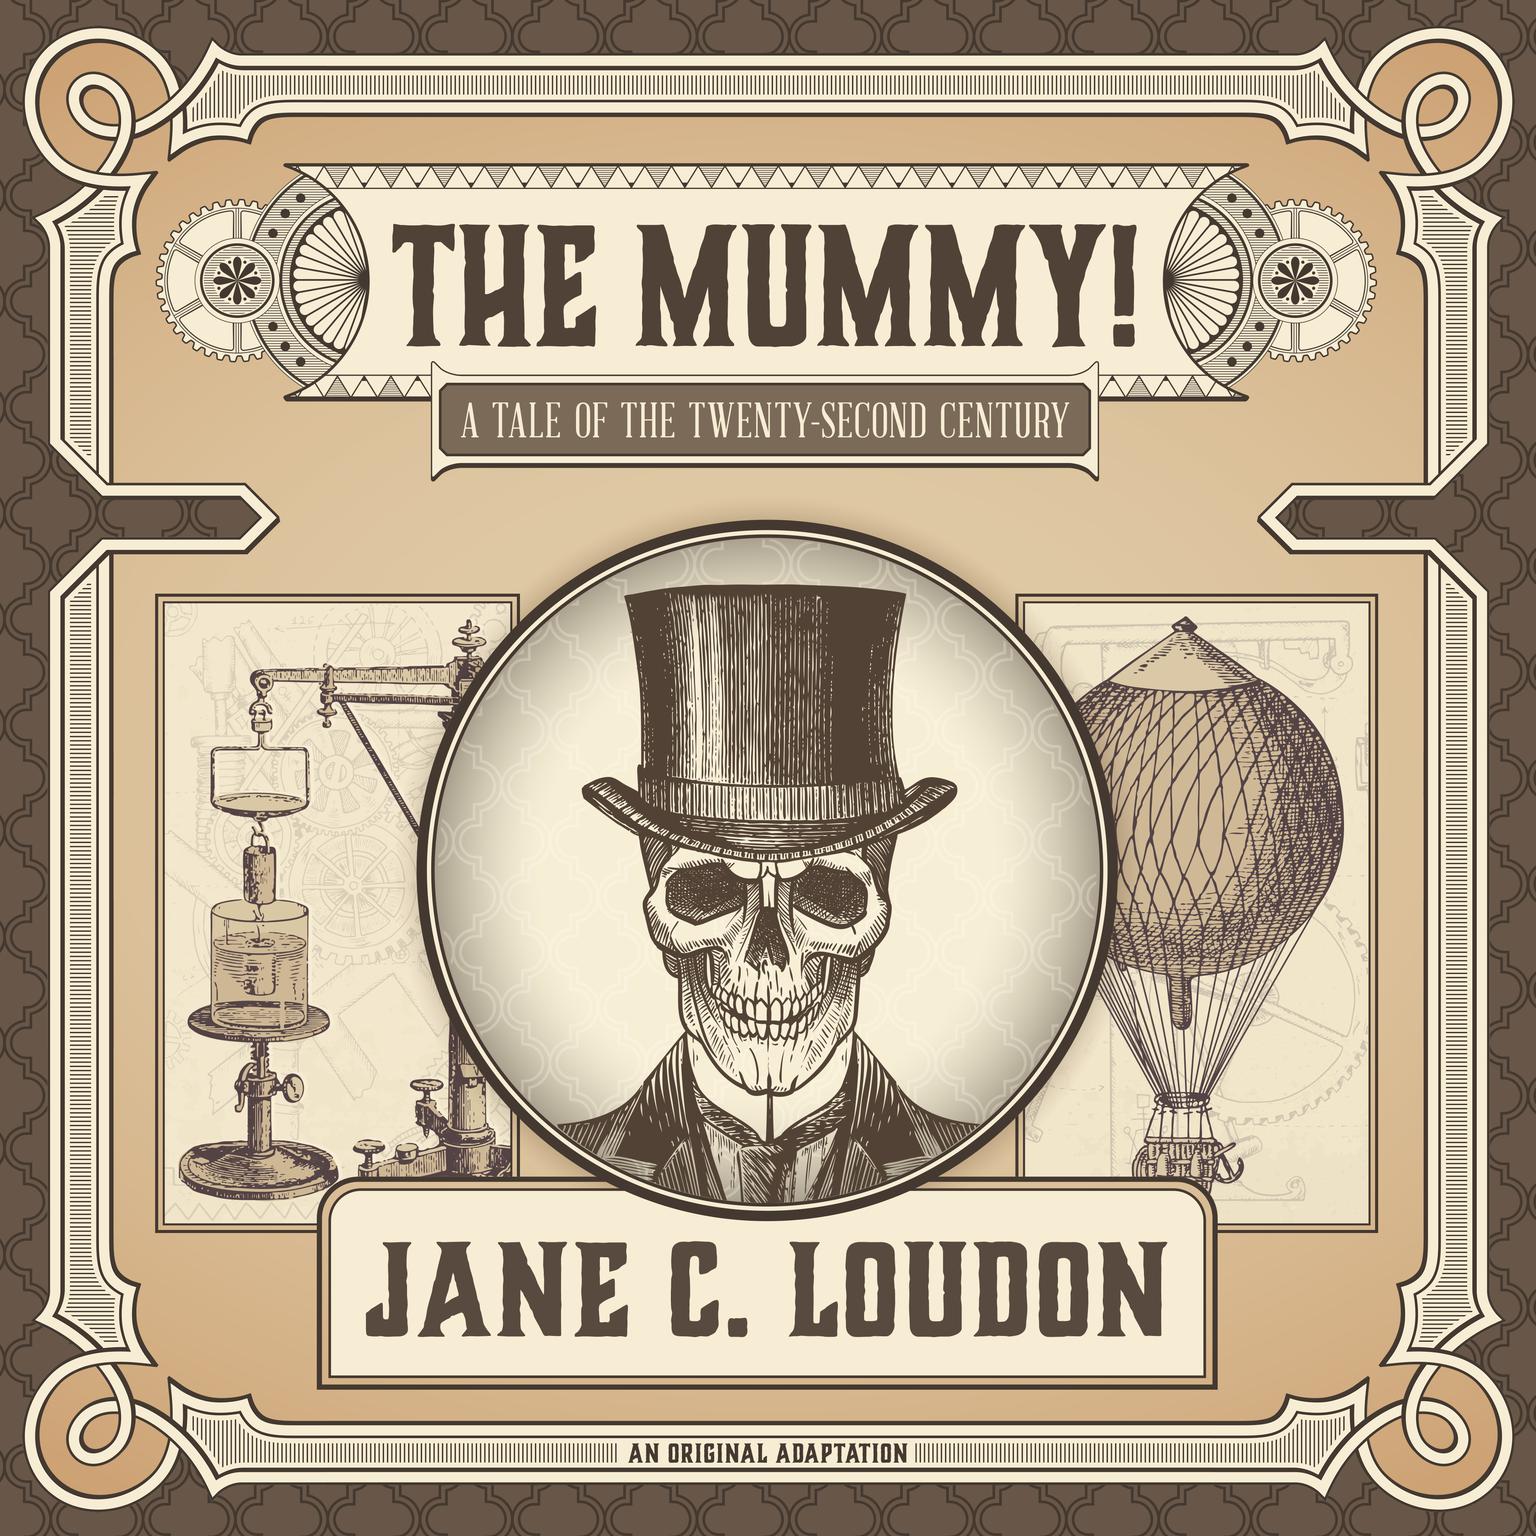 The Mummy!: A Tale of the Twenty-Second Century Audiobook, by Jane C. Loudon